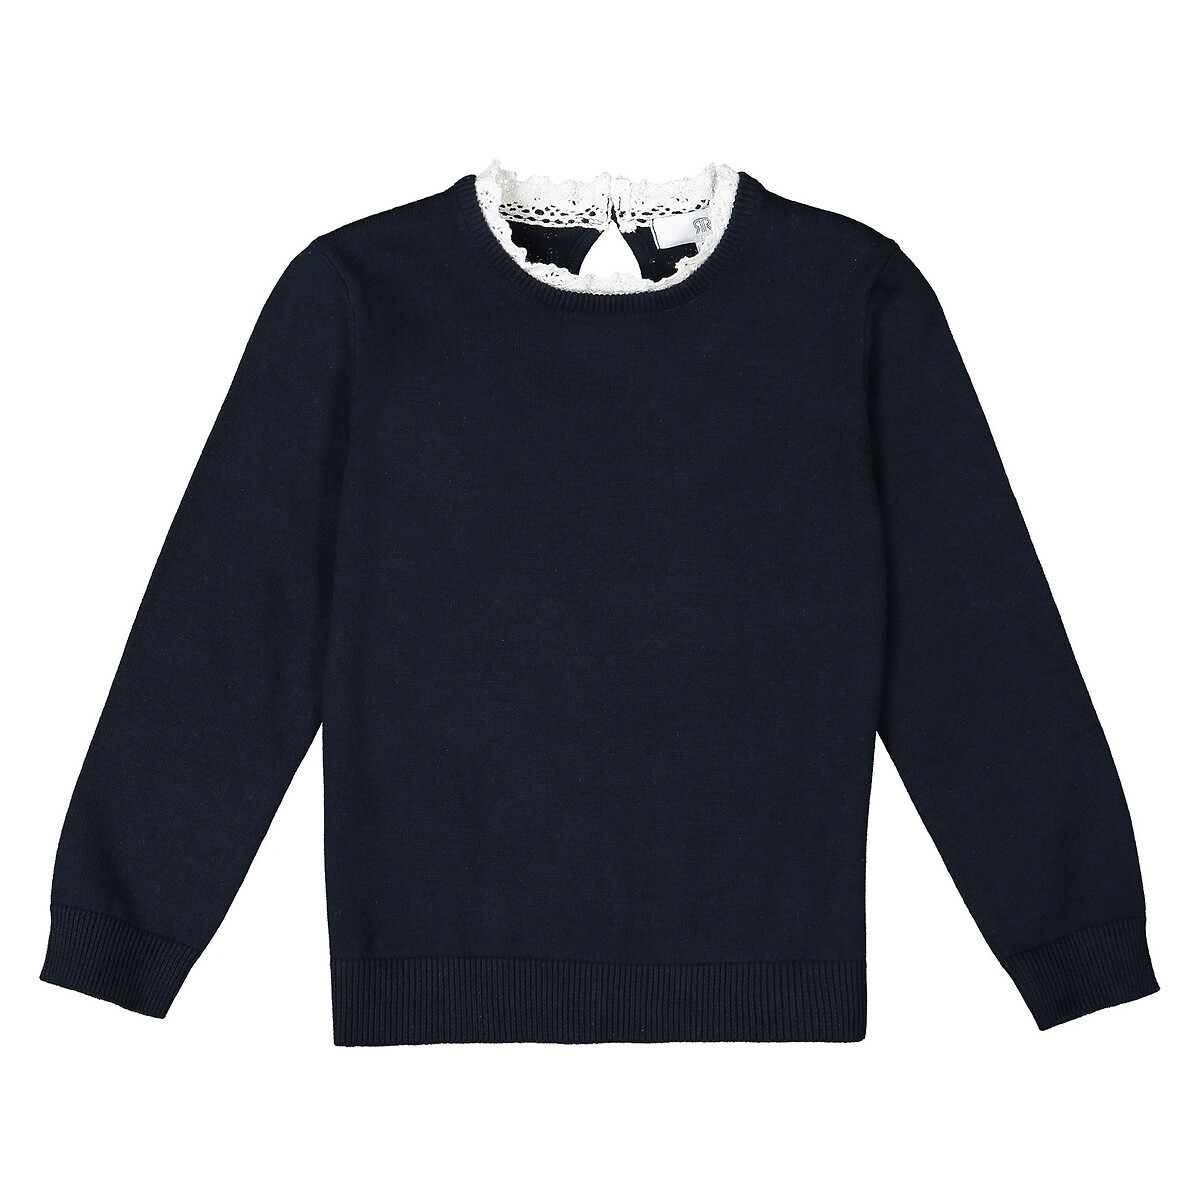 Girls Jumpers & Polo Neck Sweaters | Kids' Jumpers | La Redoute